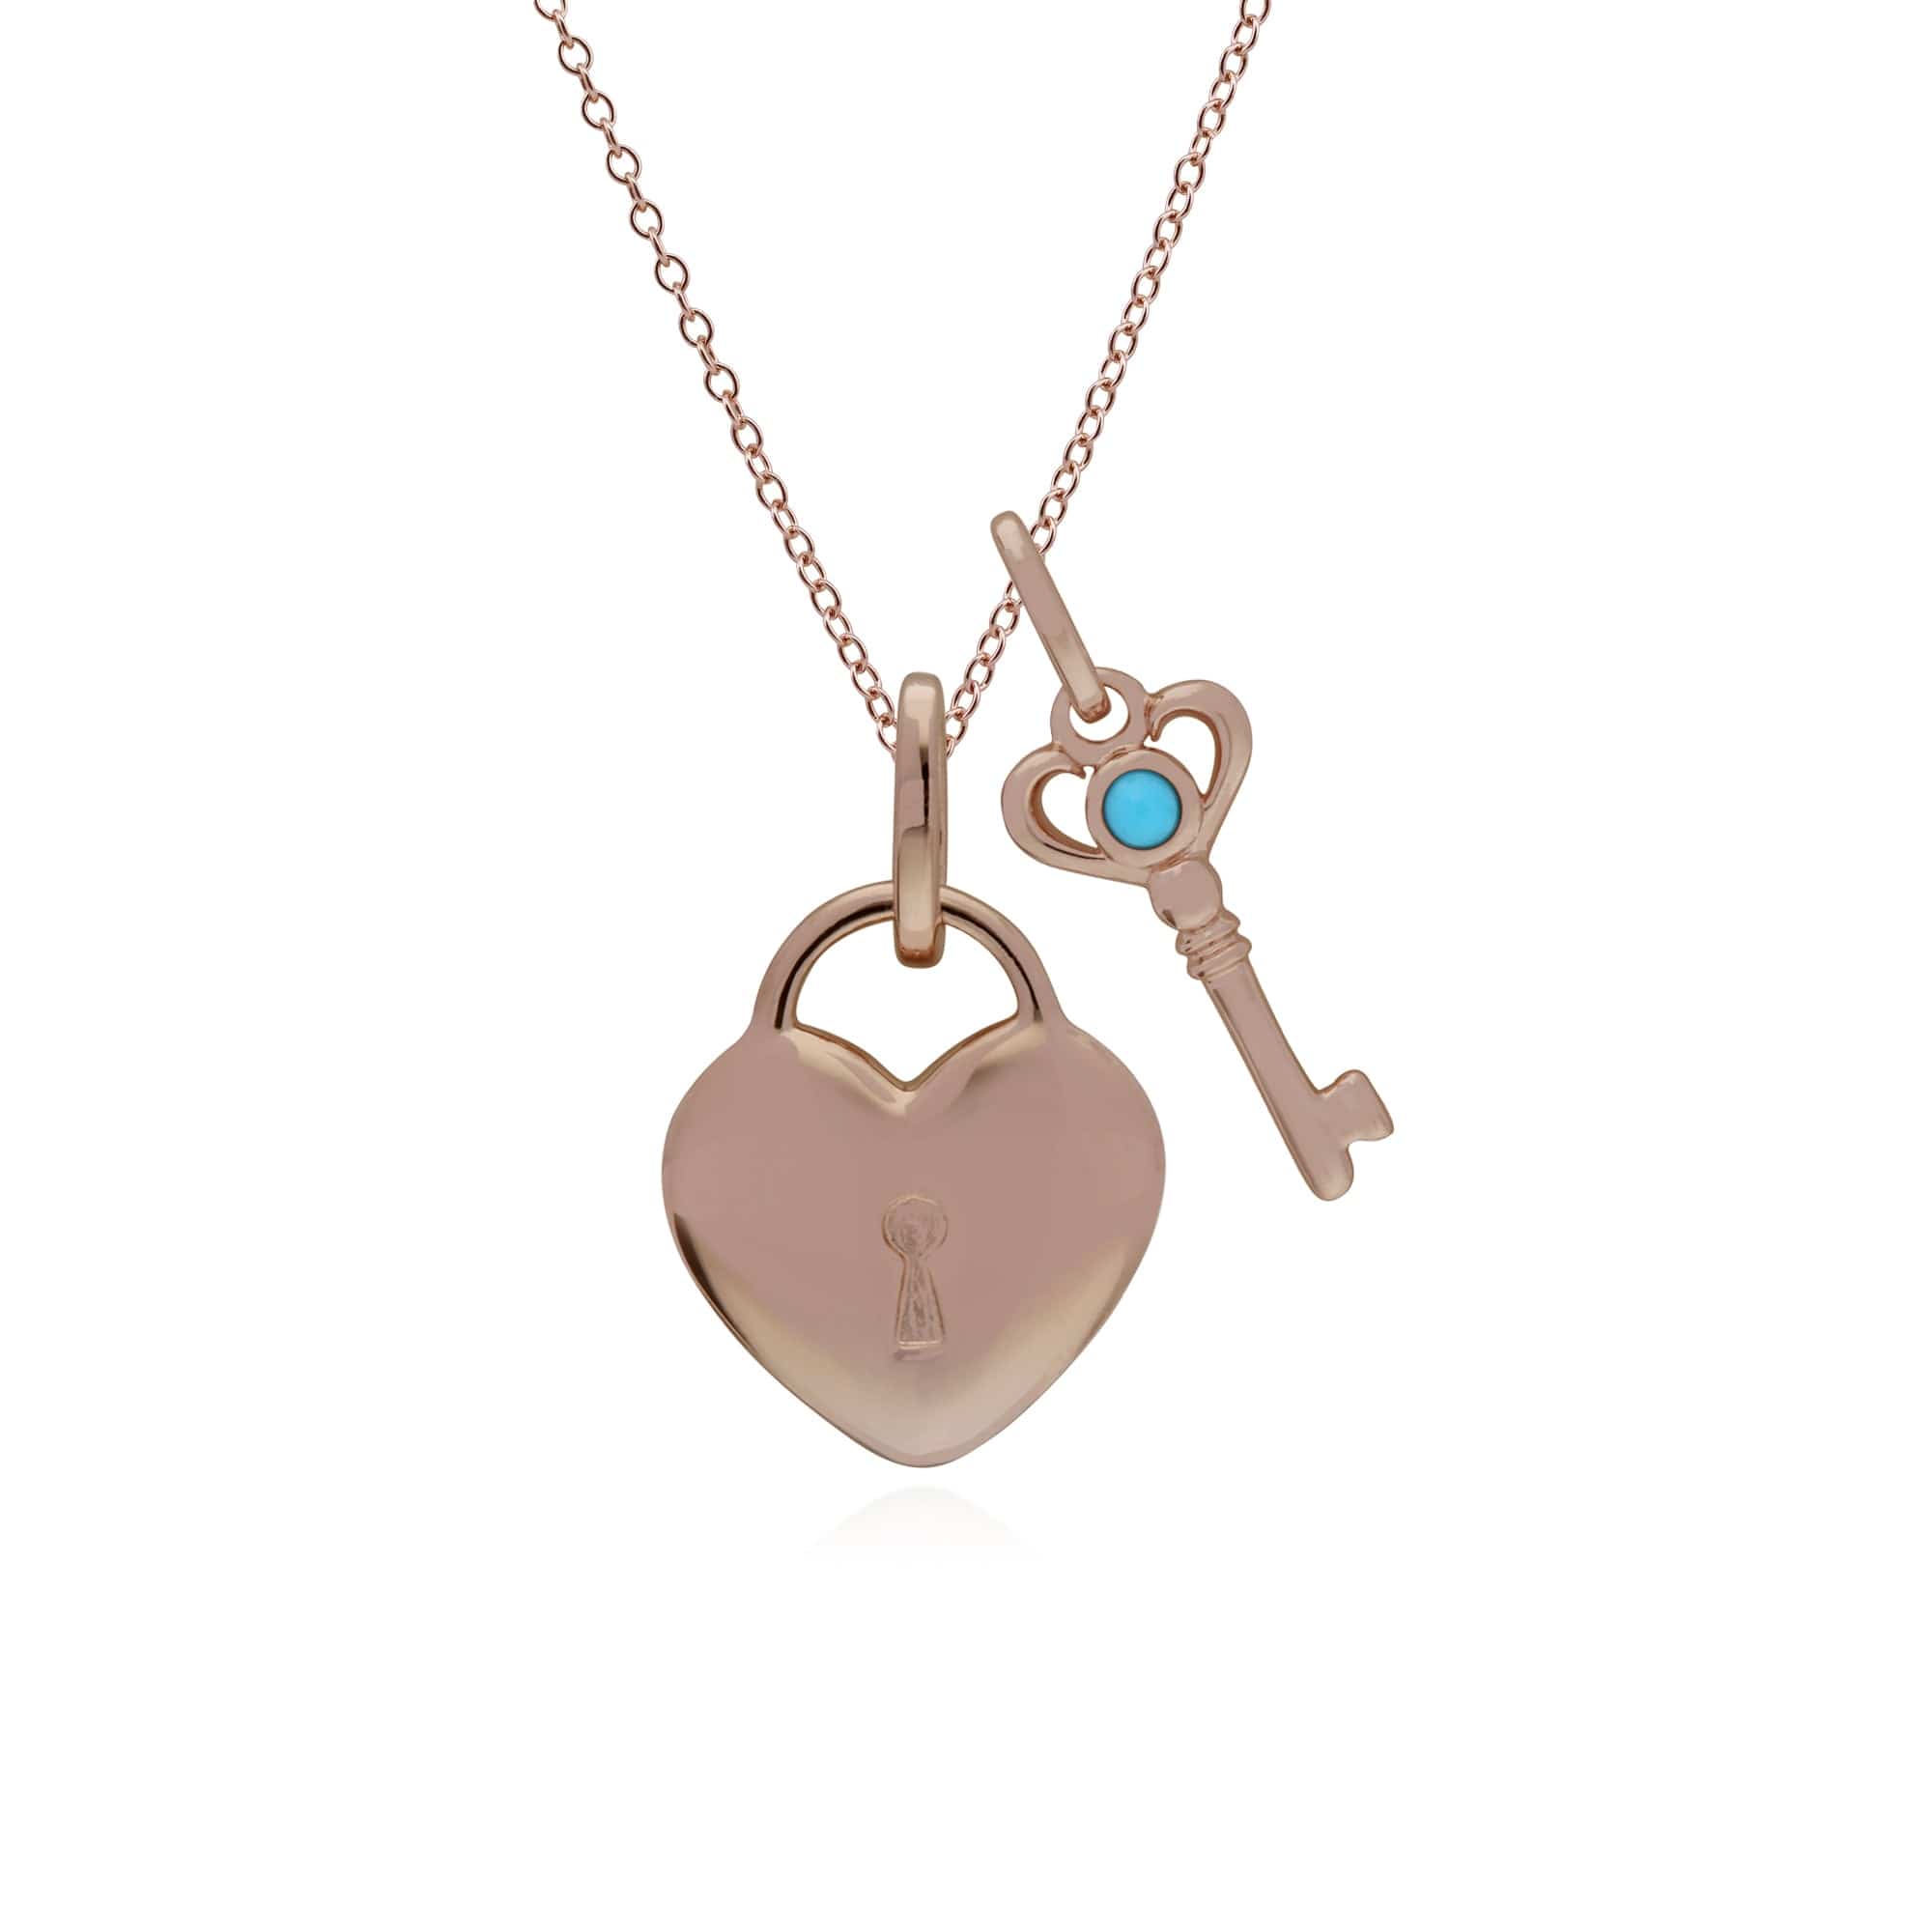 270P027402925-270P026901925 Classic Heart Lock Pendant & Turquoise Key Charm in Rose Gold Plated 925 Sterling Silver 1